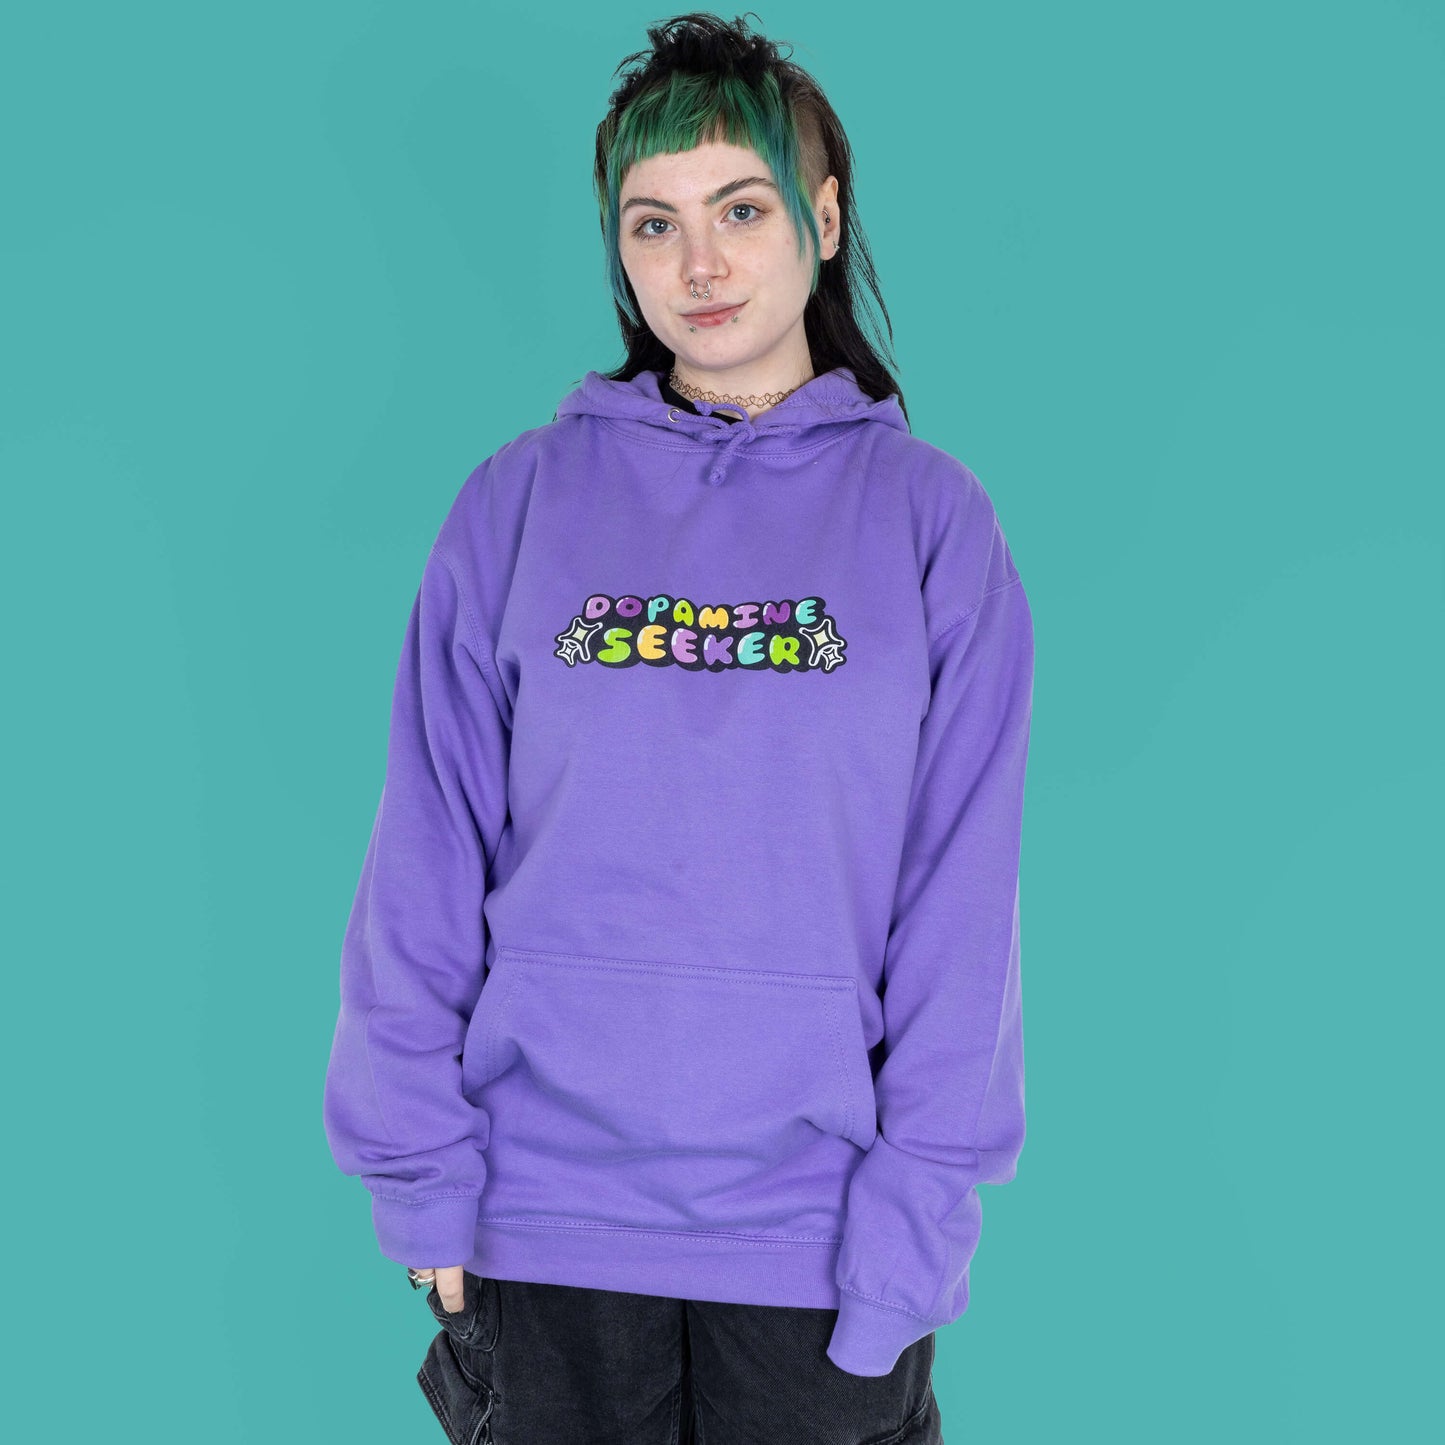 The Dopamine Seeker Hoodie in digital lavender being modelled by Faeryn who has a green and black mullet, they have styled the cosy hoodie with wide leg charcoal jeans. They are facing forward smiling with their hands by their side. The hoodie design has 'dopamine seeker' written in the middle in rainbow bubble font and black sparkle outlines. The hoodie has purple drawstrings and a large centre pocket. Design is raising awareness for ADHD and neurodivergence.